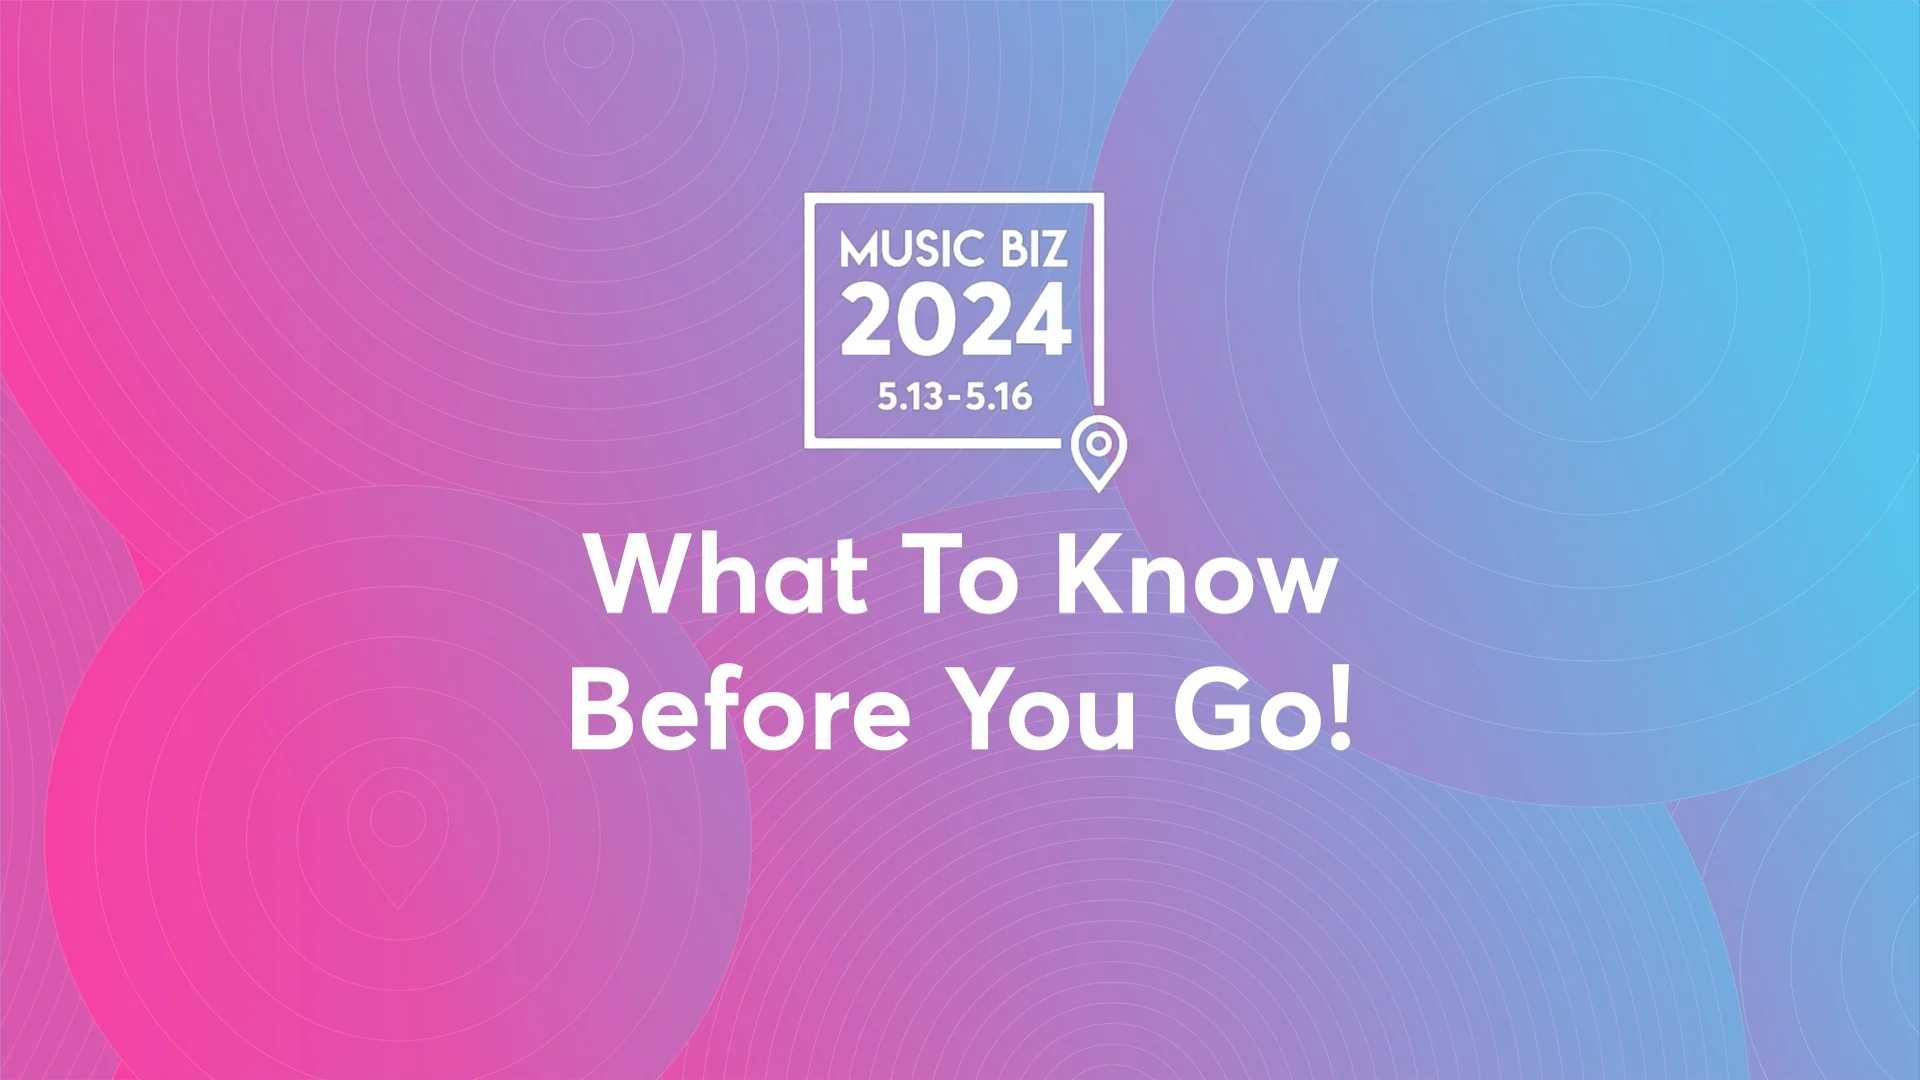 Music Biz 2024 What To Know Before You Go! on Vimeo